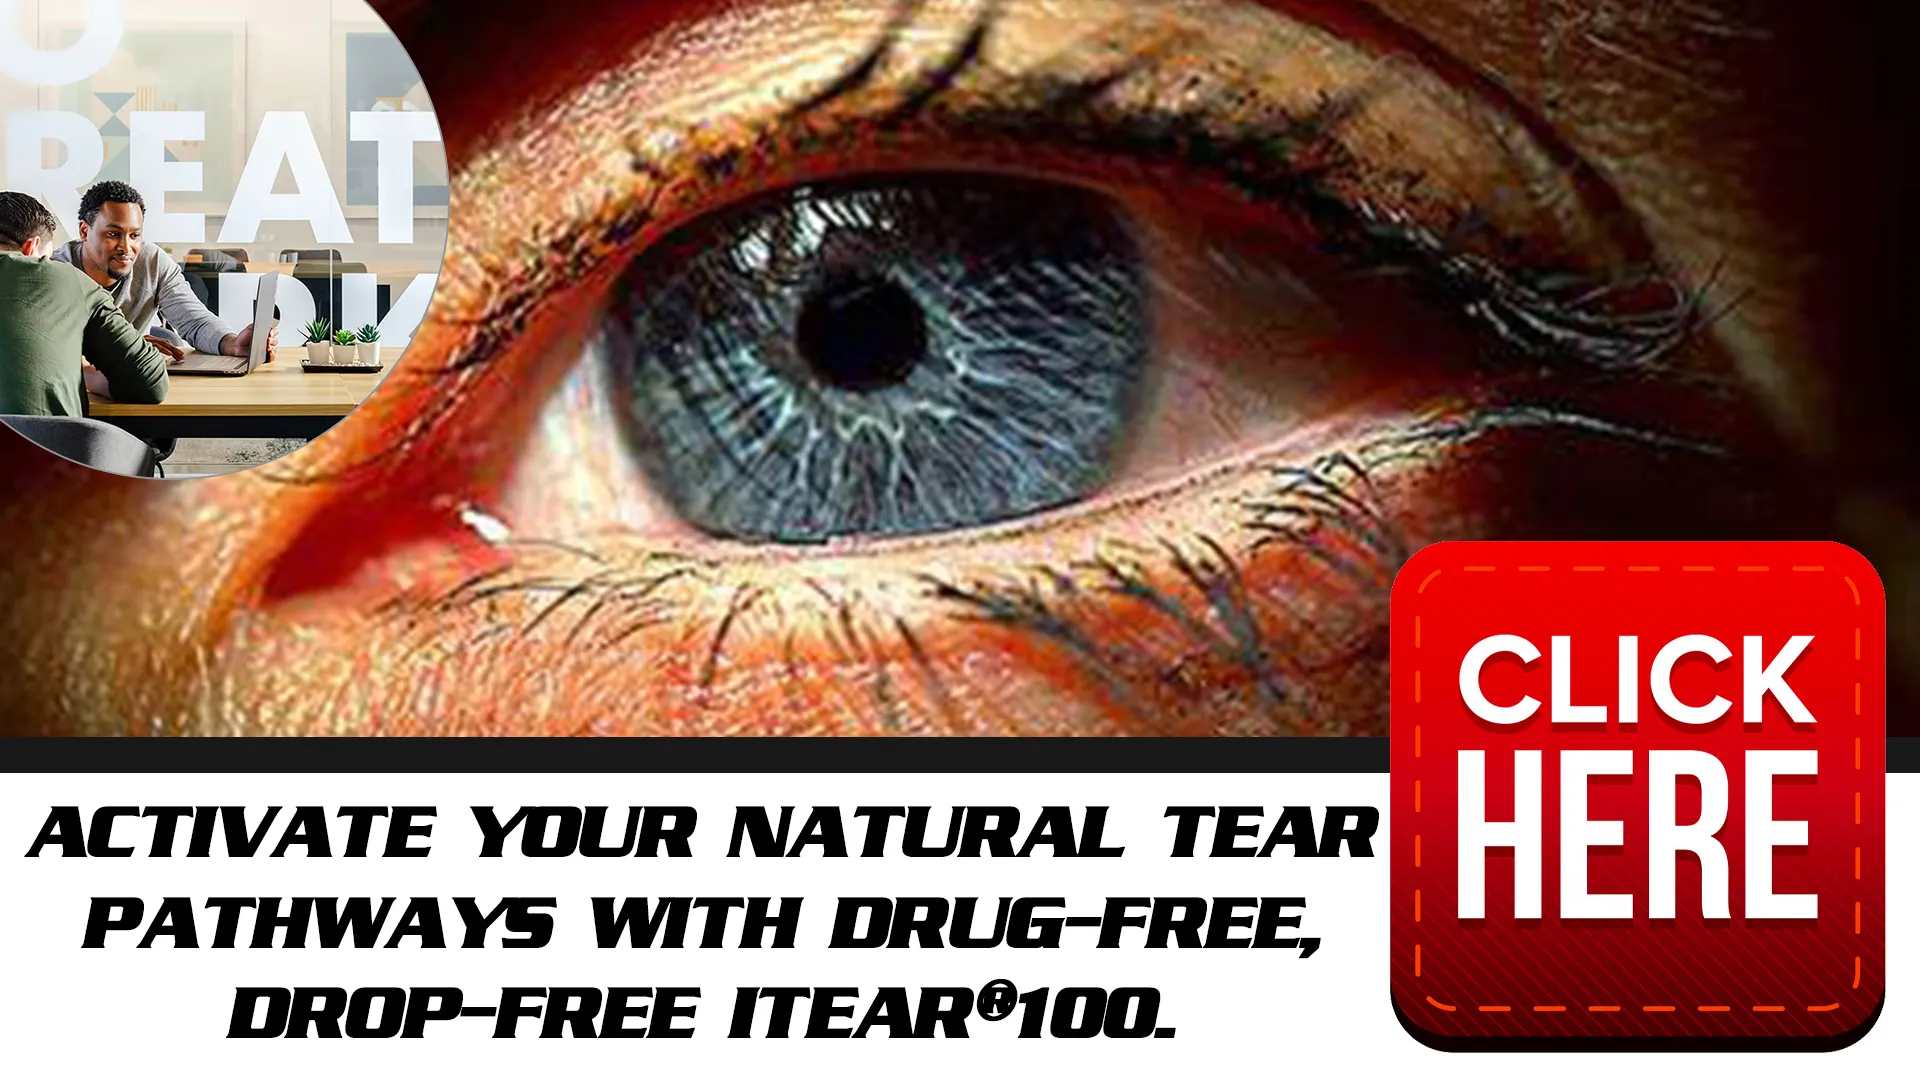 Introducing the iTEAR100 Device for Dry Eye Relief